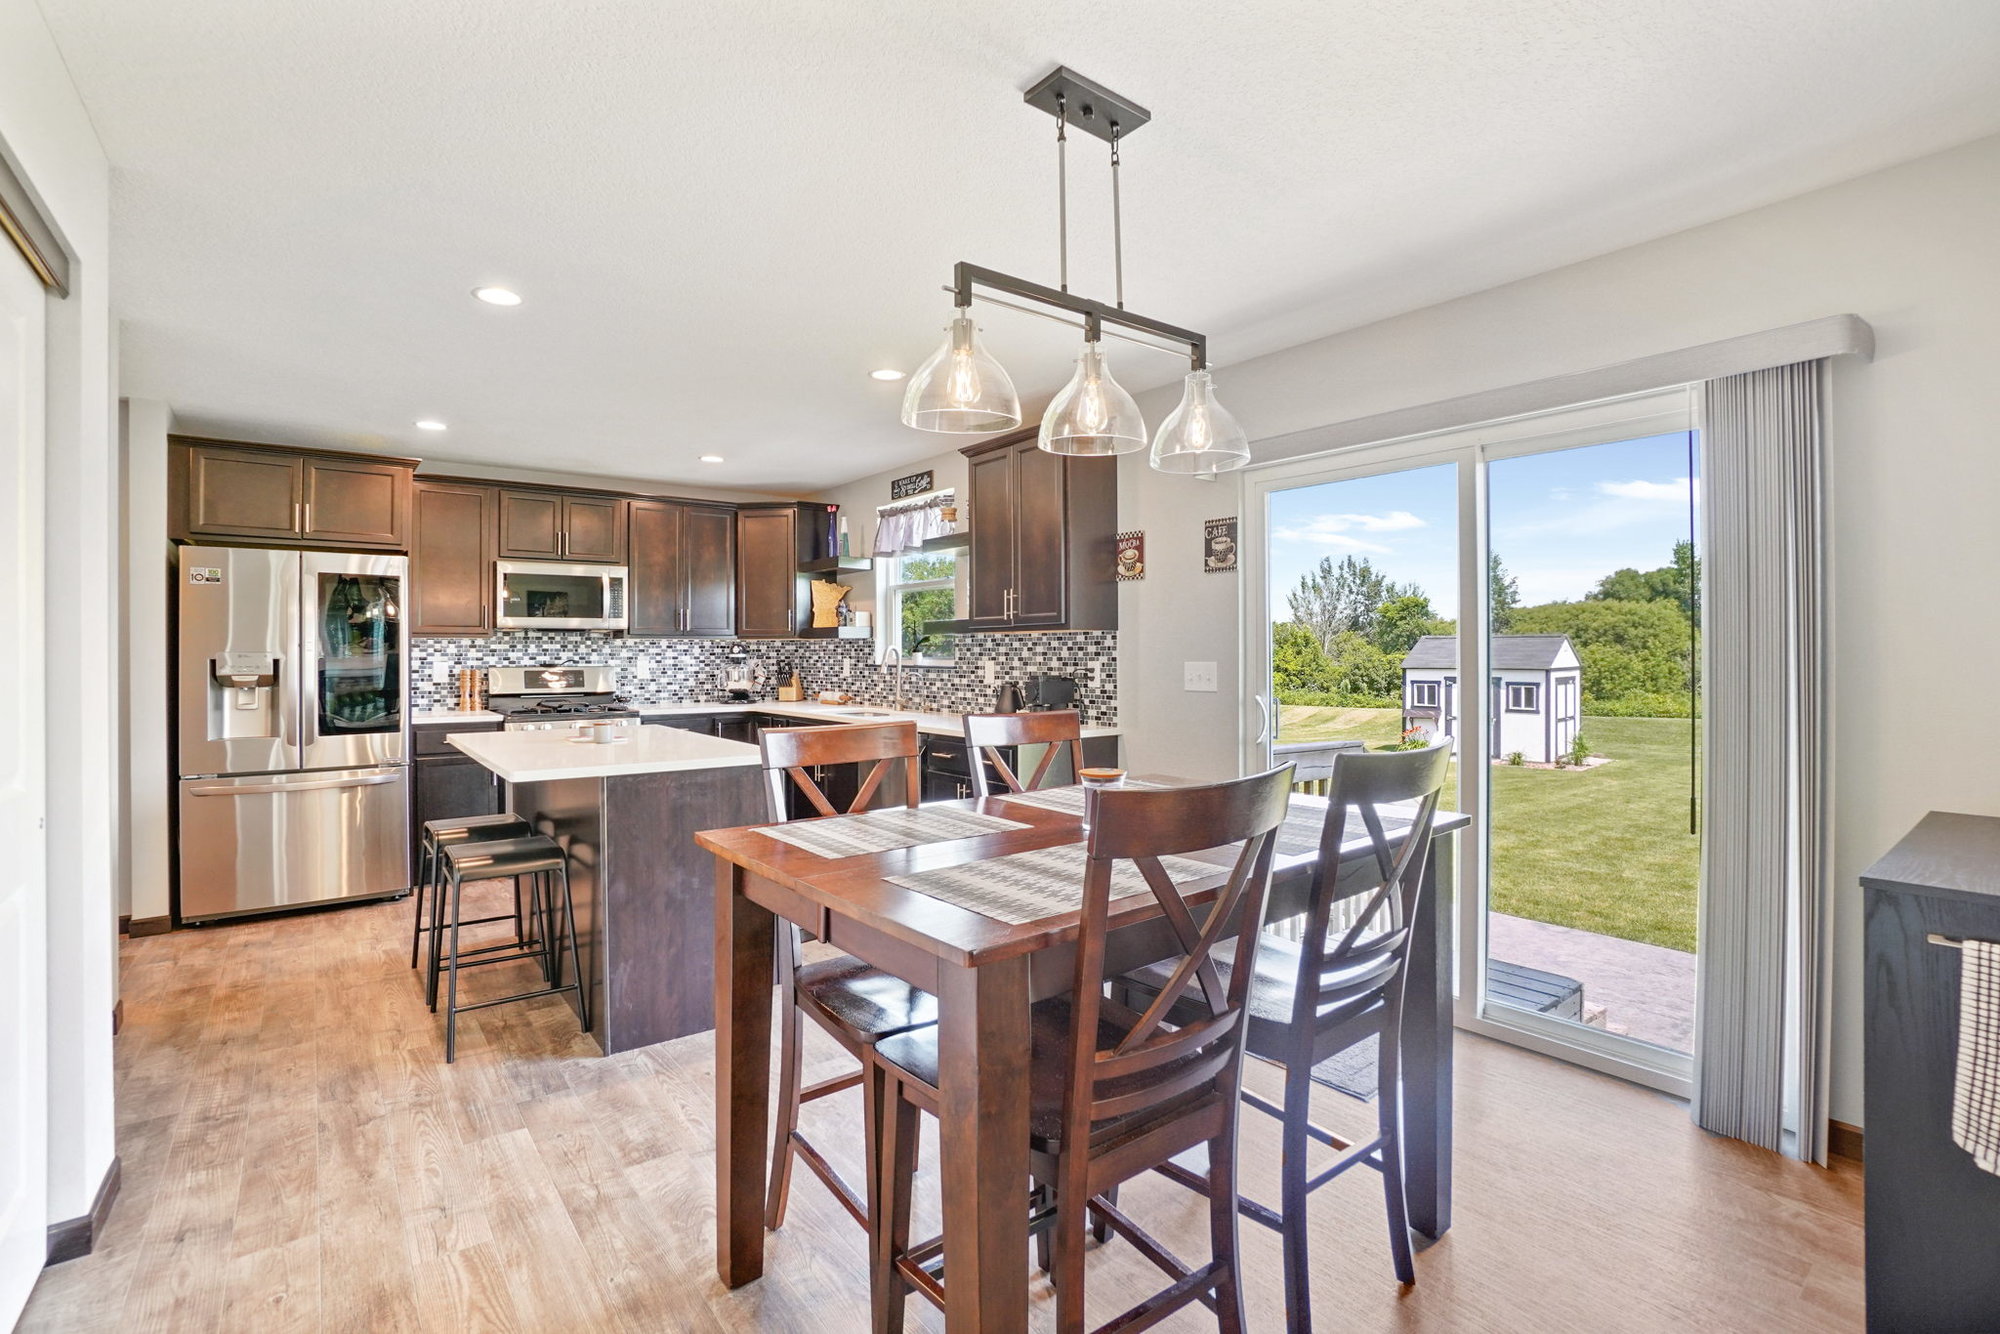 What an amazing opportunity to own a 1/2 acre lot in Waterloo! This newer construction home offers 3 bedrooms including a master suite, 2.5 baths, and a super convenient laundry room on the 2nd floor.